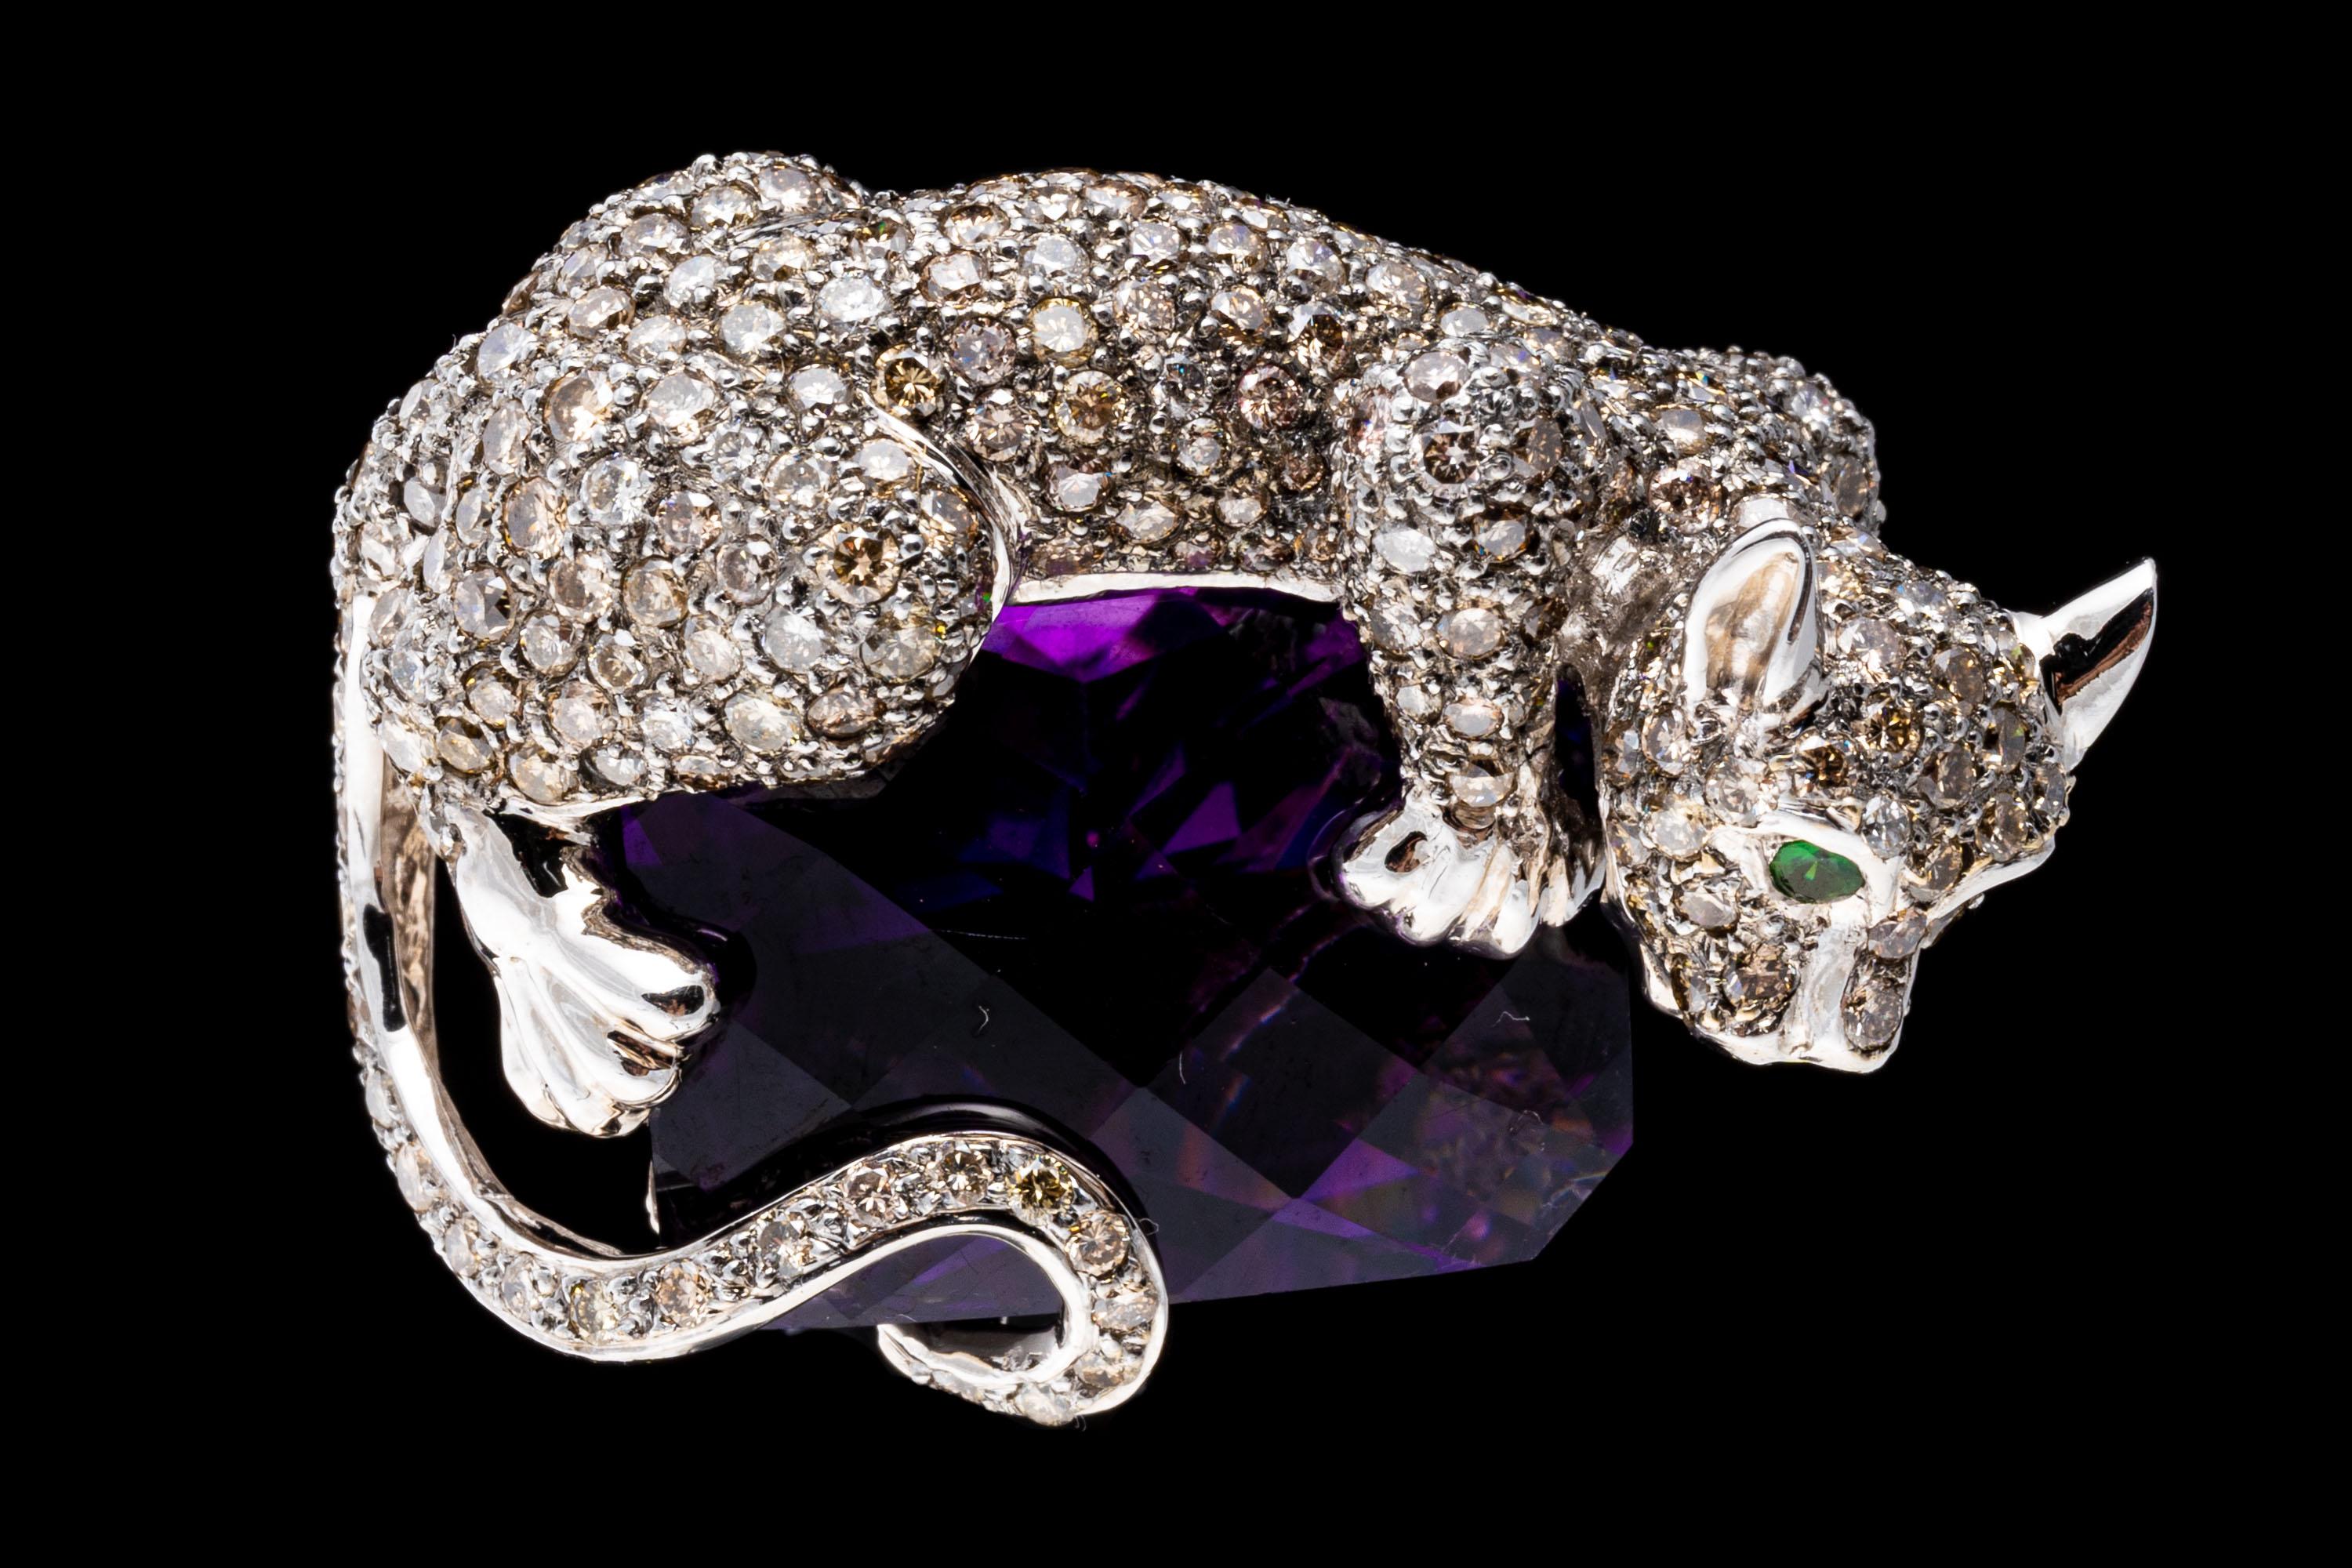 14k Gold Pave Diamond Panther Ring Atop An Amethyst, App. 13.64 CTS 2